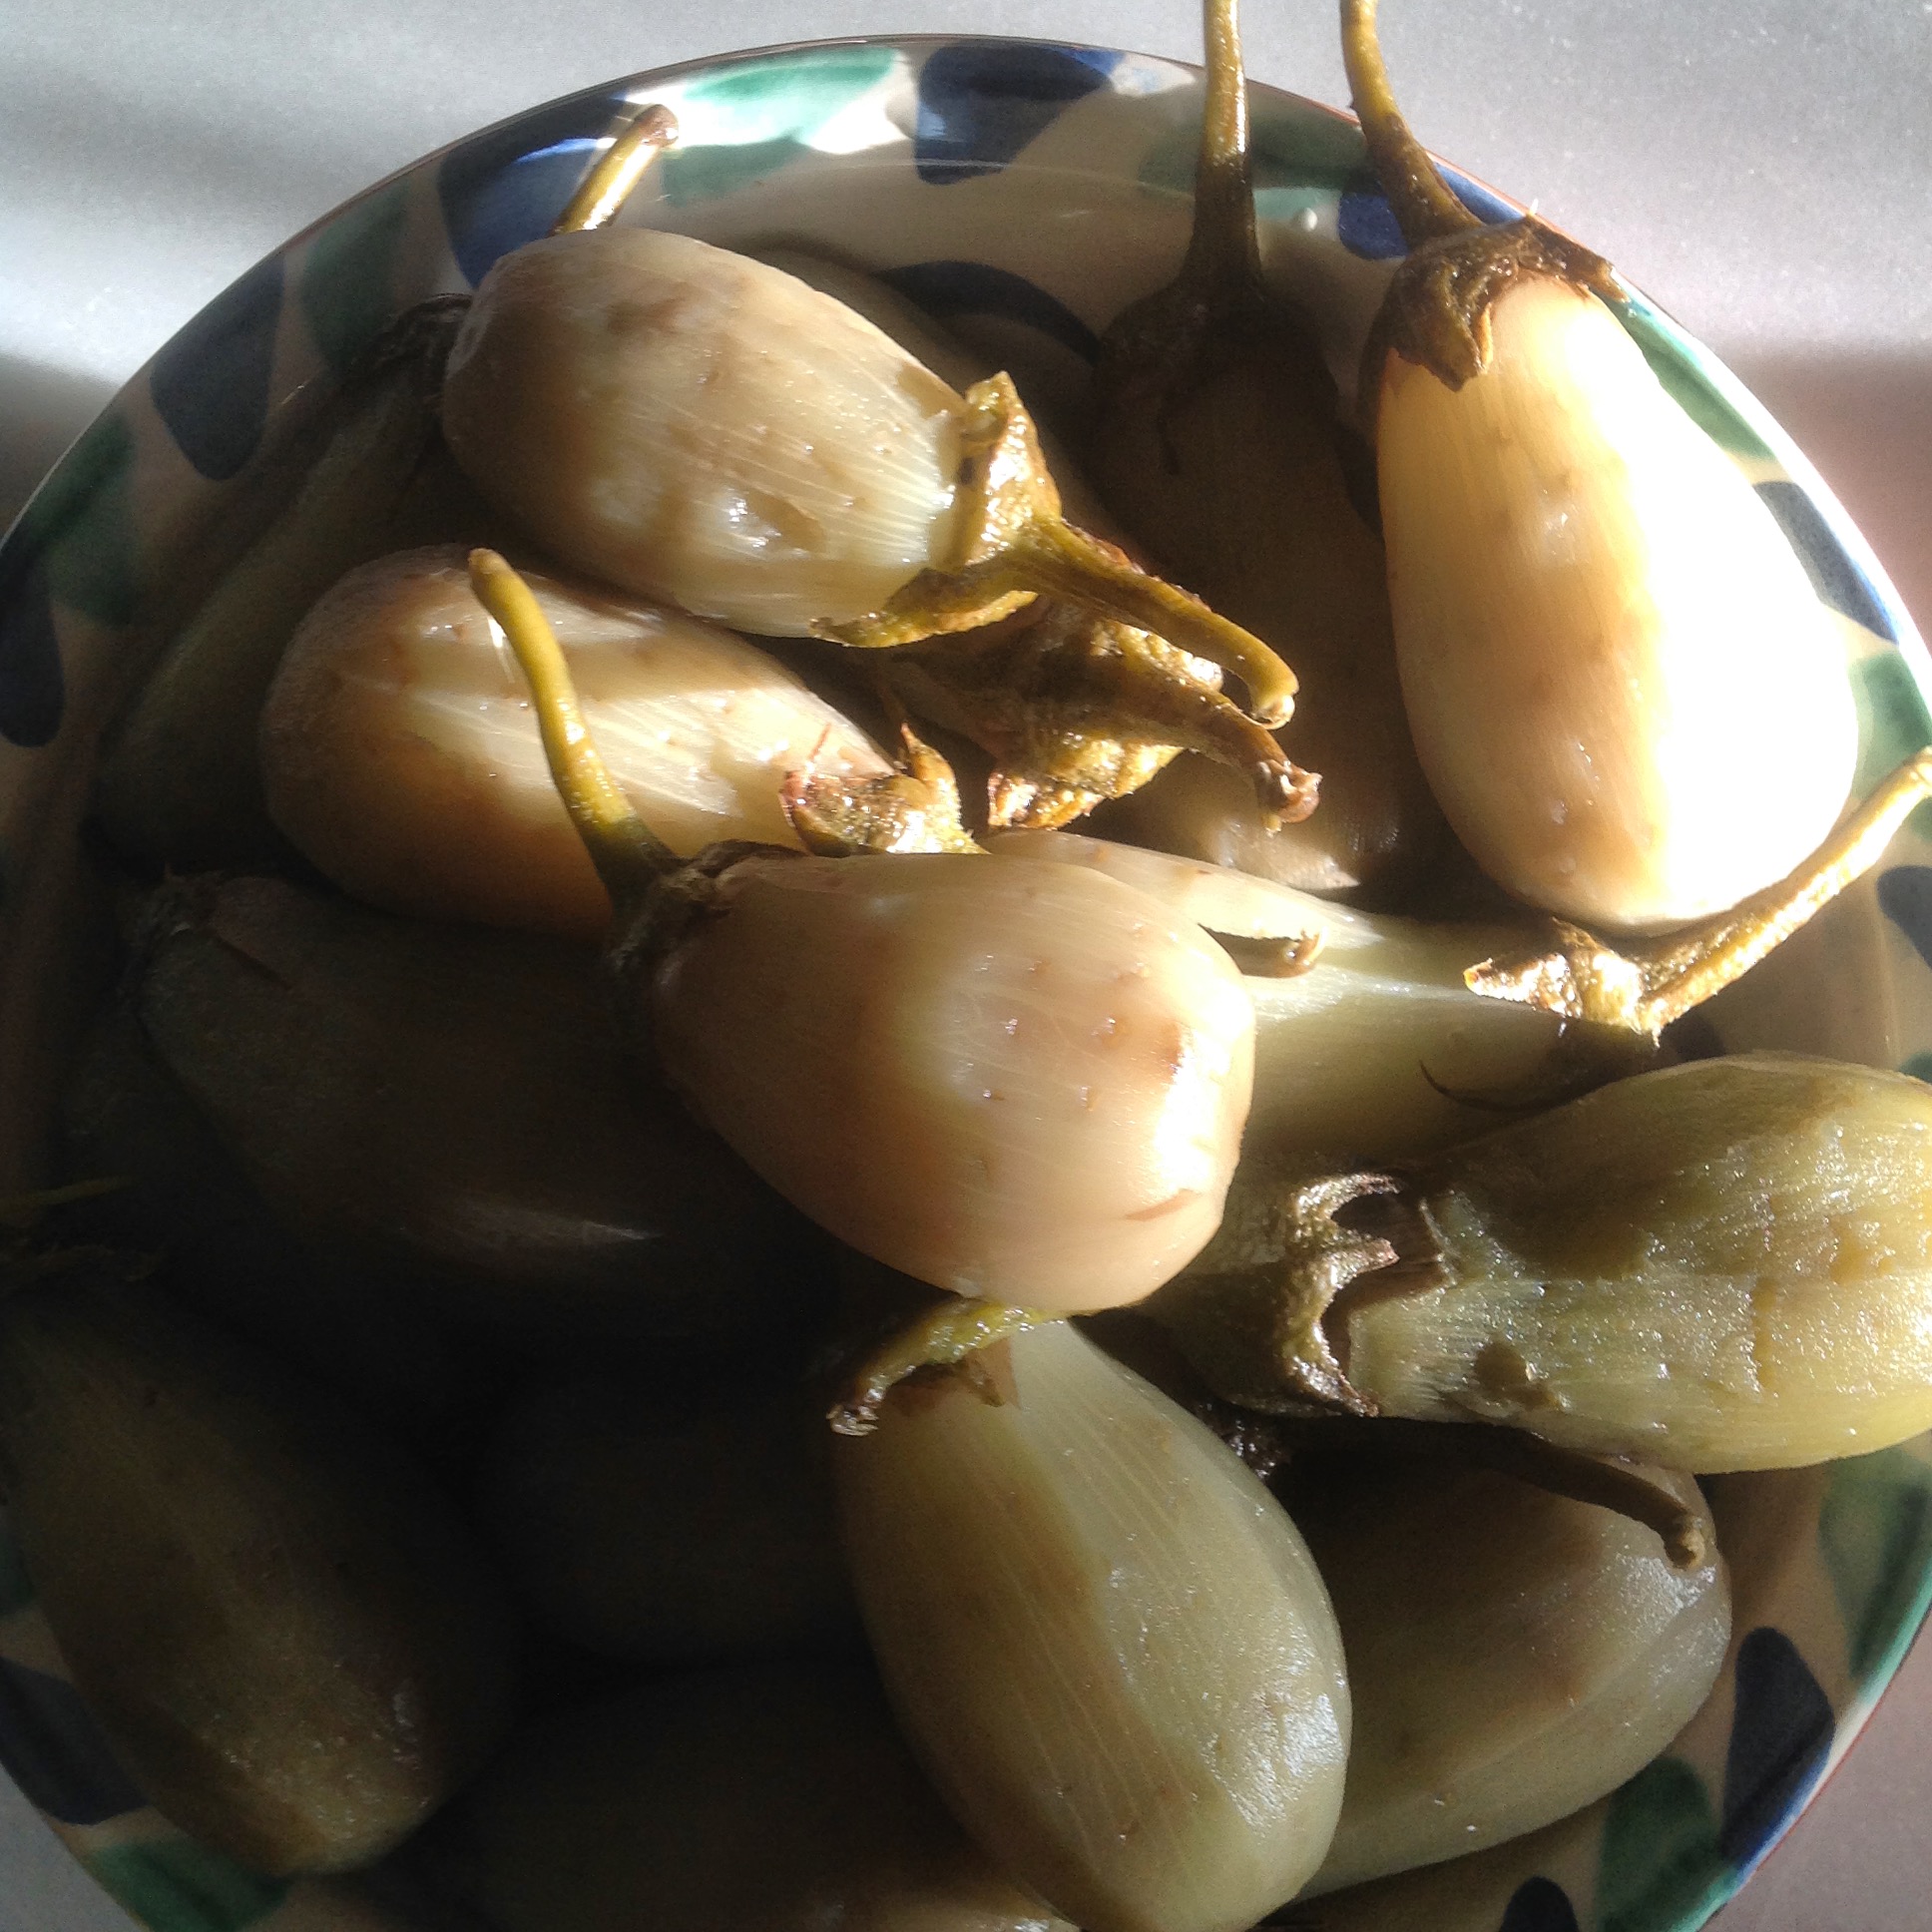 Scarlet Chinese Eggplant Seeds, This Sunday, I took the Sca…